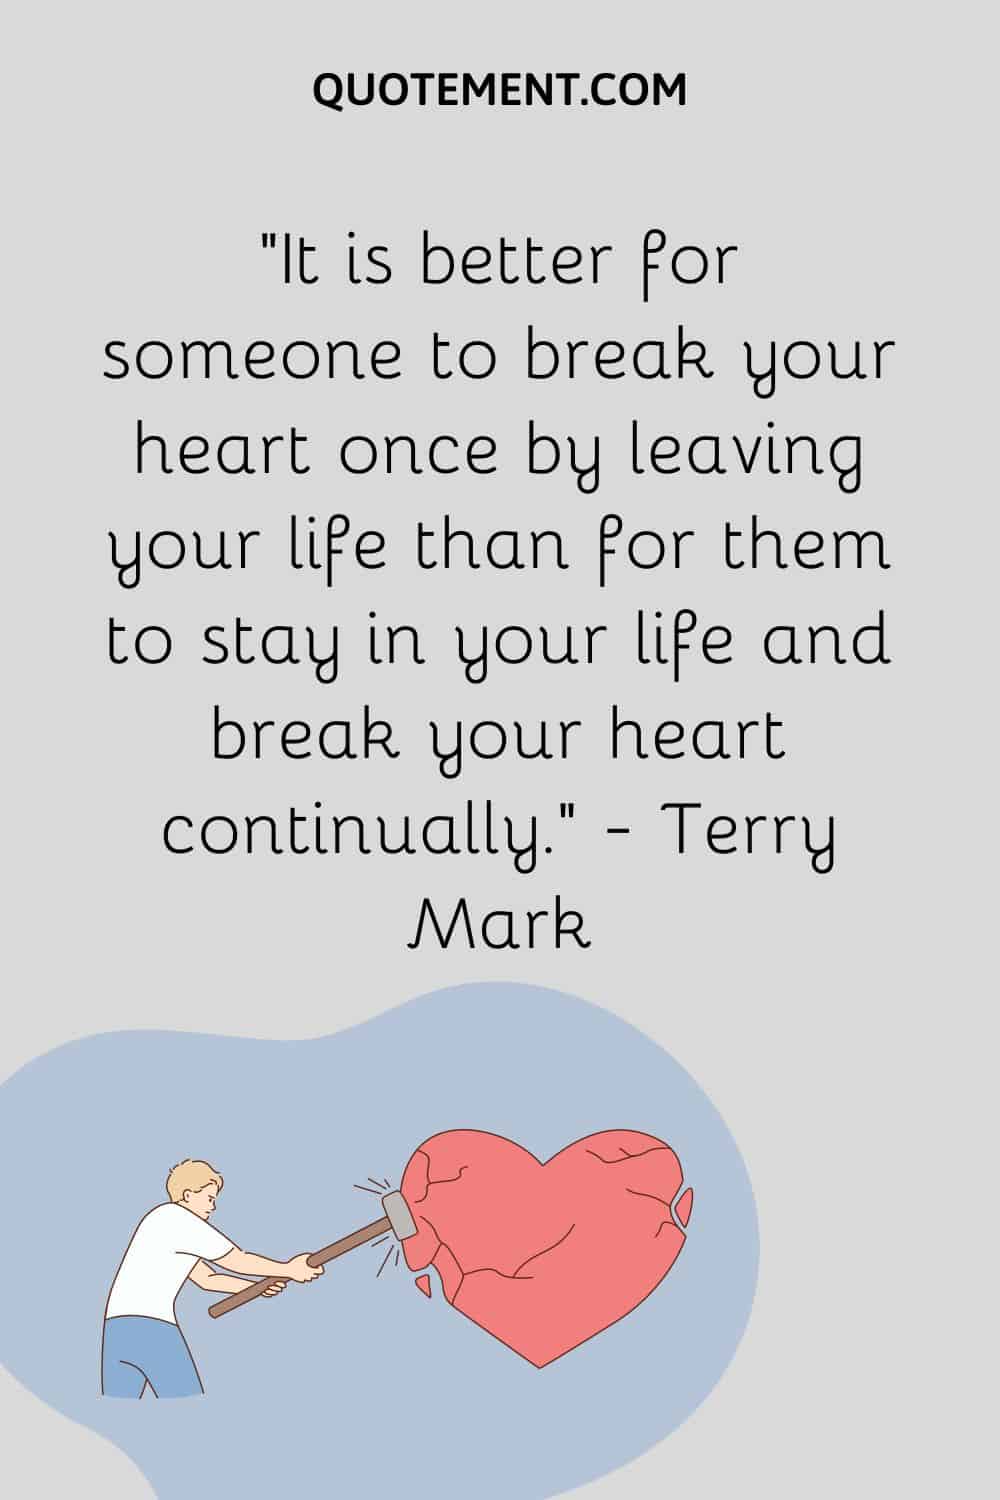 It is better for someone to break your heart once by leaving your life than for them to stay in your life and break your heart continually